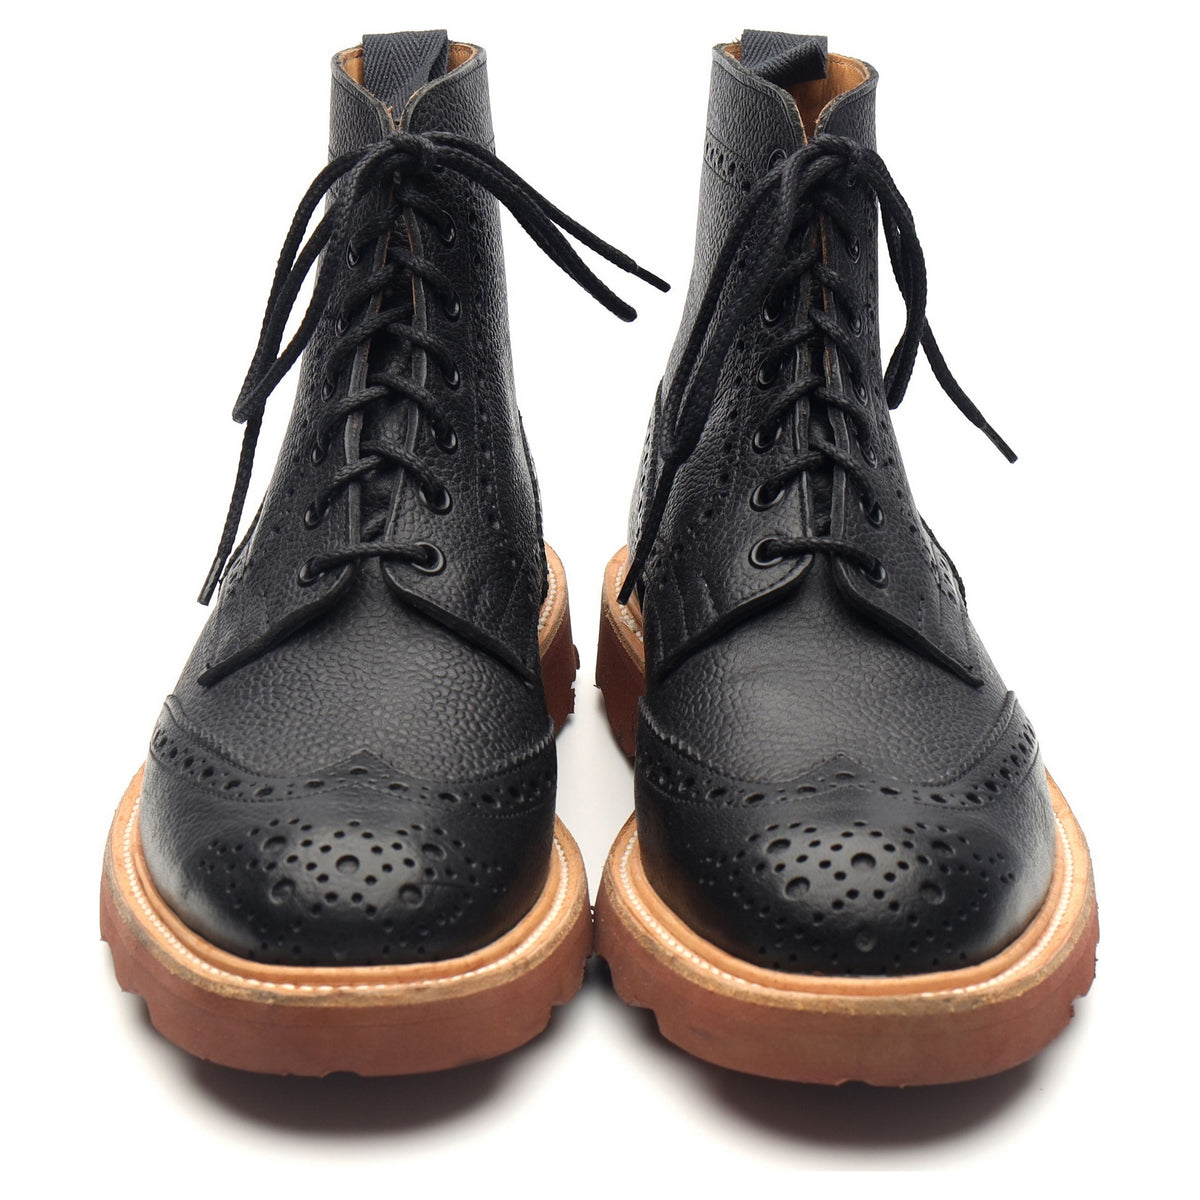 Black Leather Brogue Boots UK 6.5